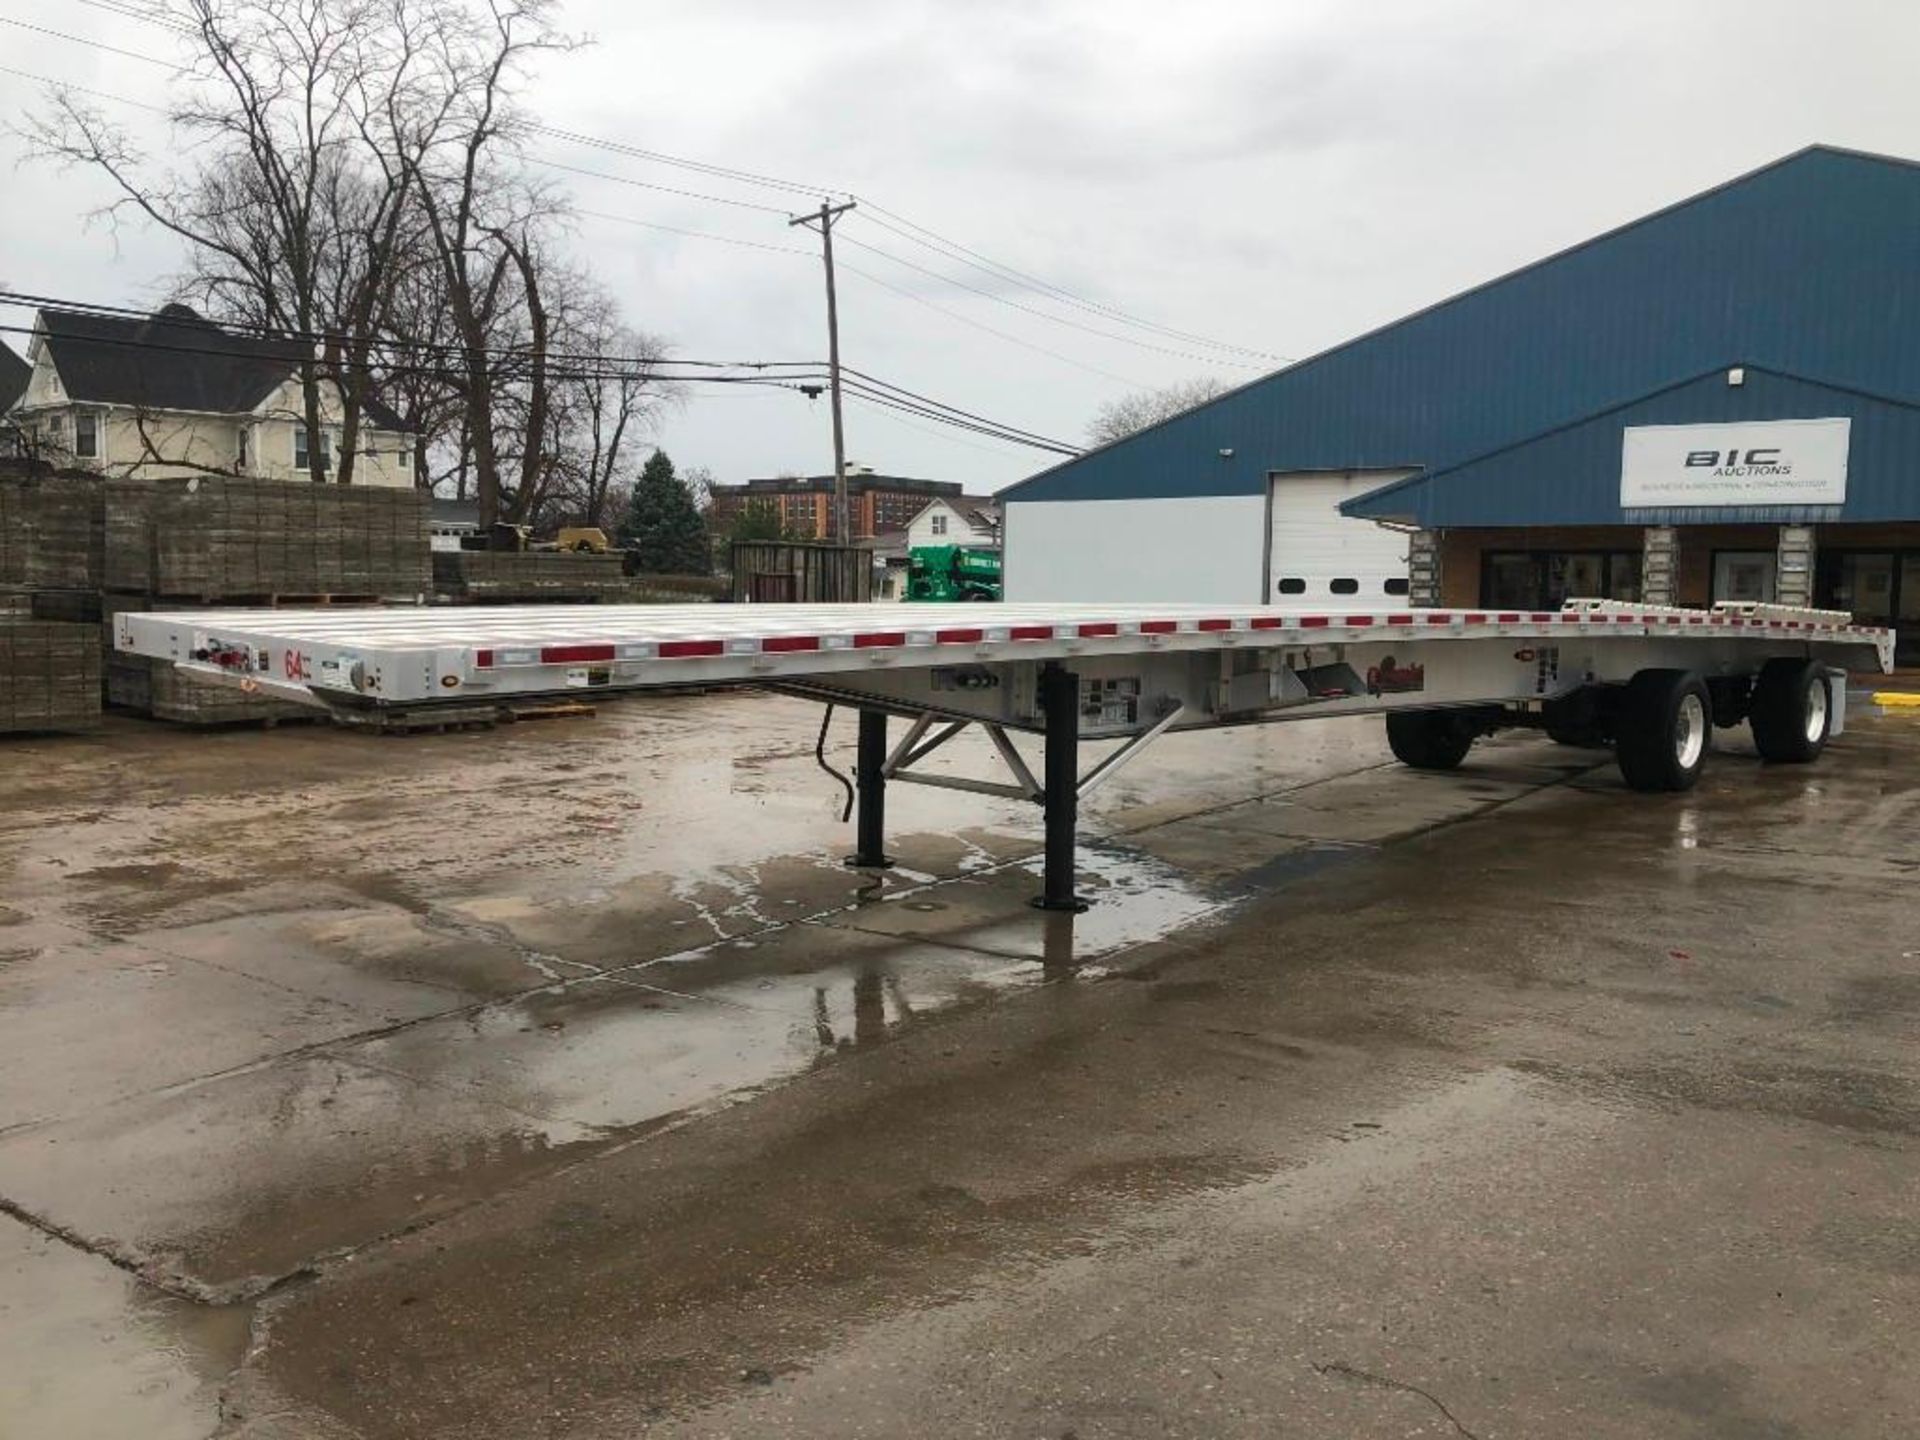 (1) 2018 WILSON Flatbed 53' X 102" Bed, Model AF-1080 SS, VIN #4WW5532A4J6625996 with Ramps,